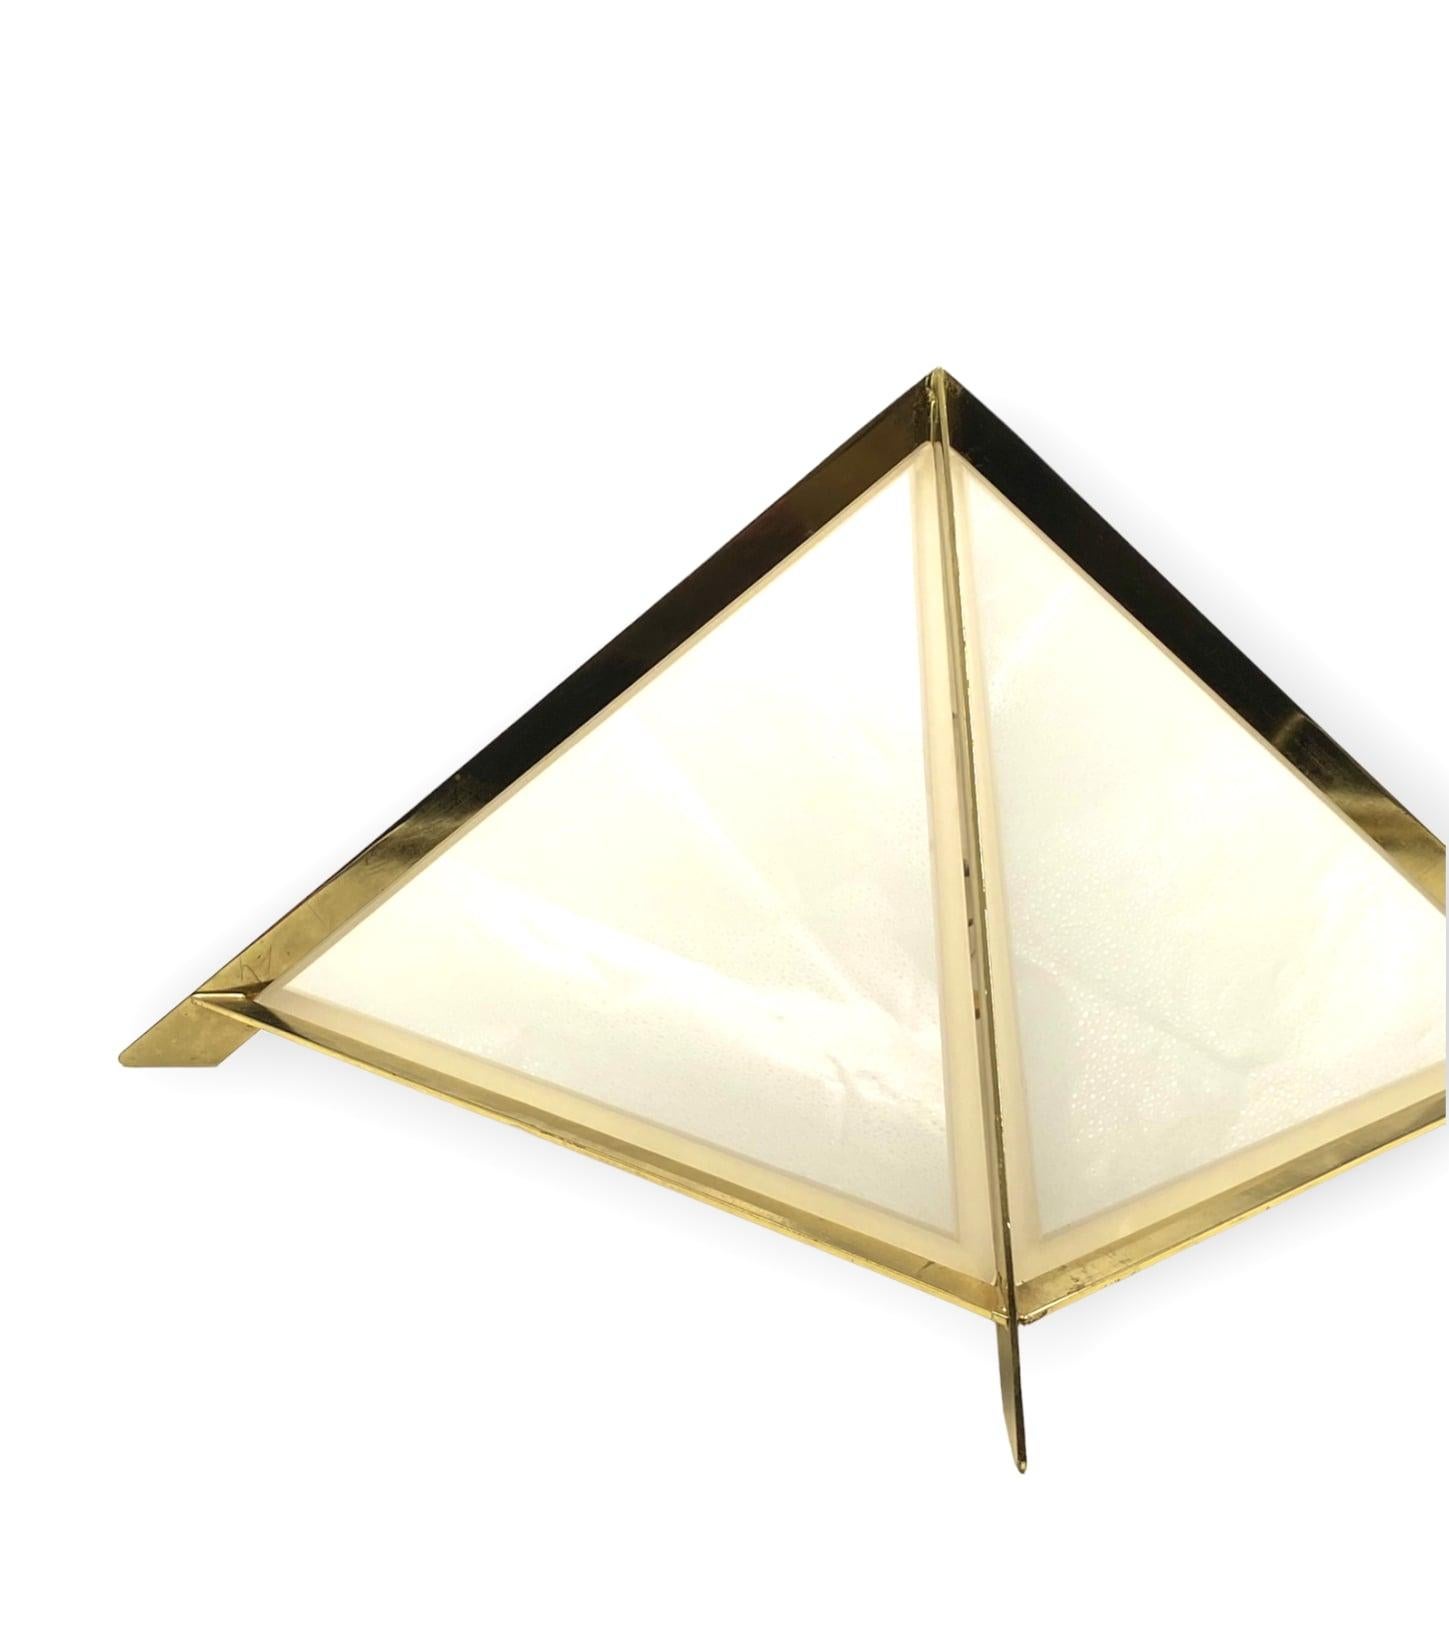 Golden Brass Pyramidal Table Lamp, Christos, Italy, 1970 For Sale 13